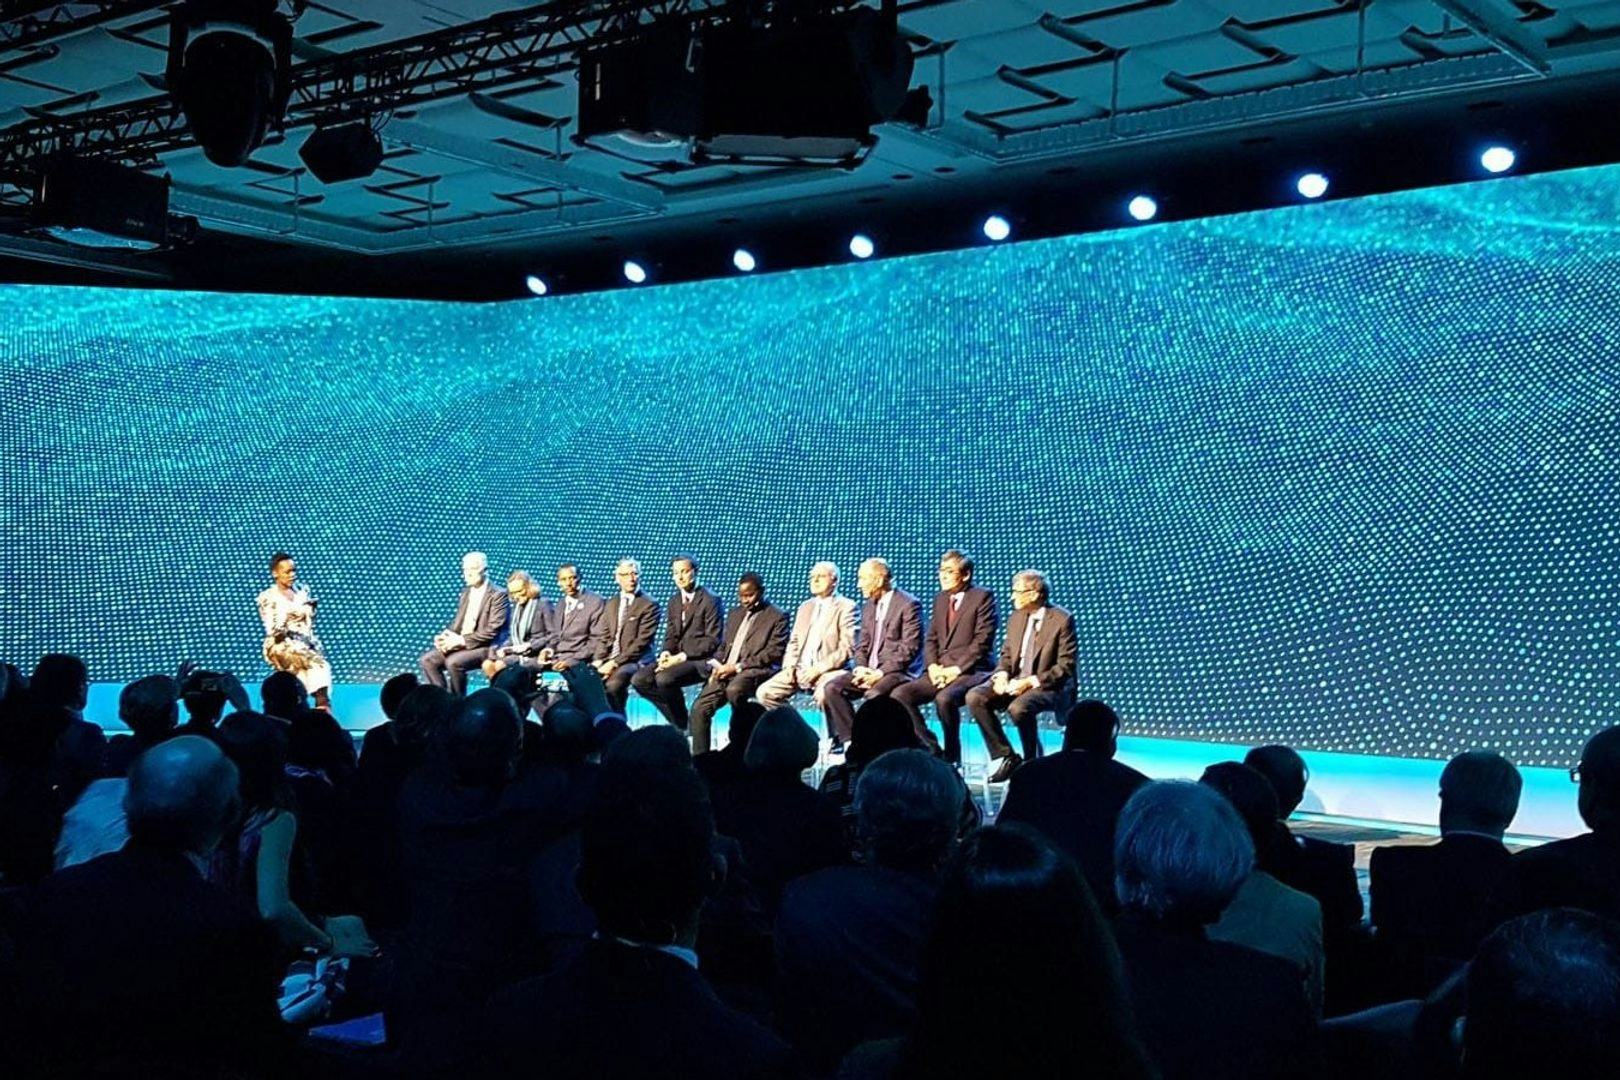 A photo taken during the Cascade presentation. Ten speakers sit on stage in front of three floor to ceiling blue screens that display a mesh moving like the surface of water. In the foreground, an audience sit in the dark watching the stage.